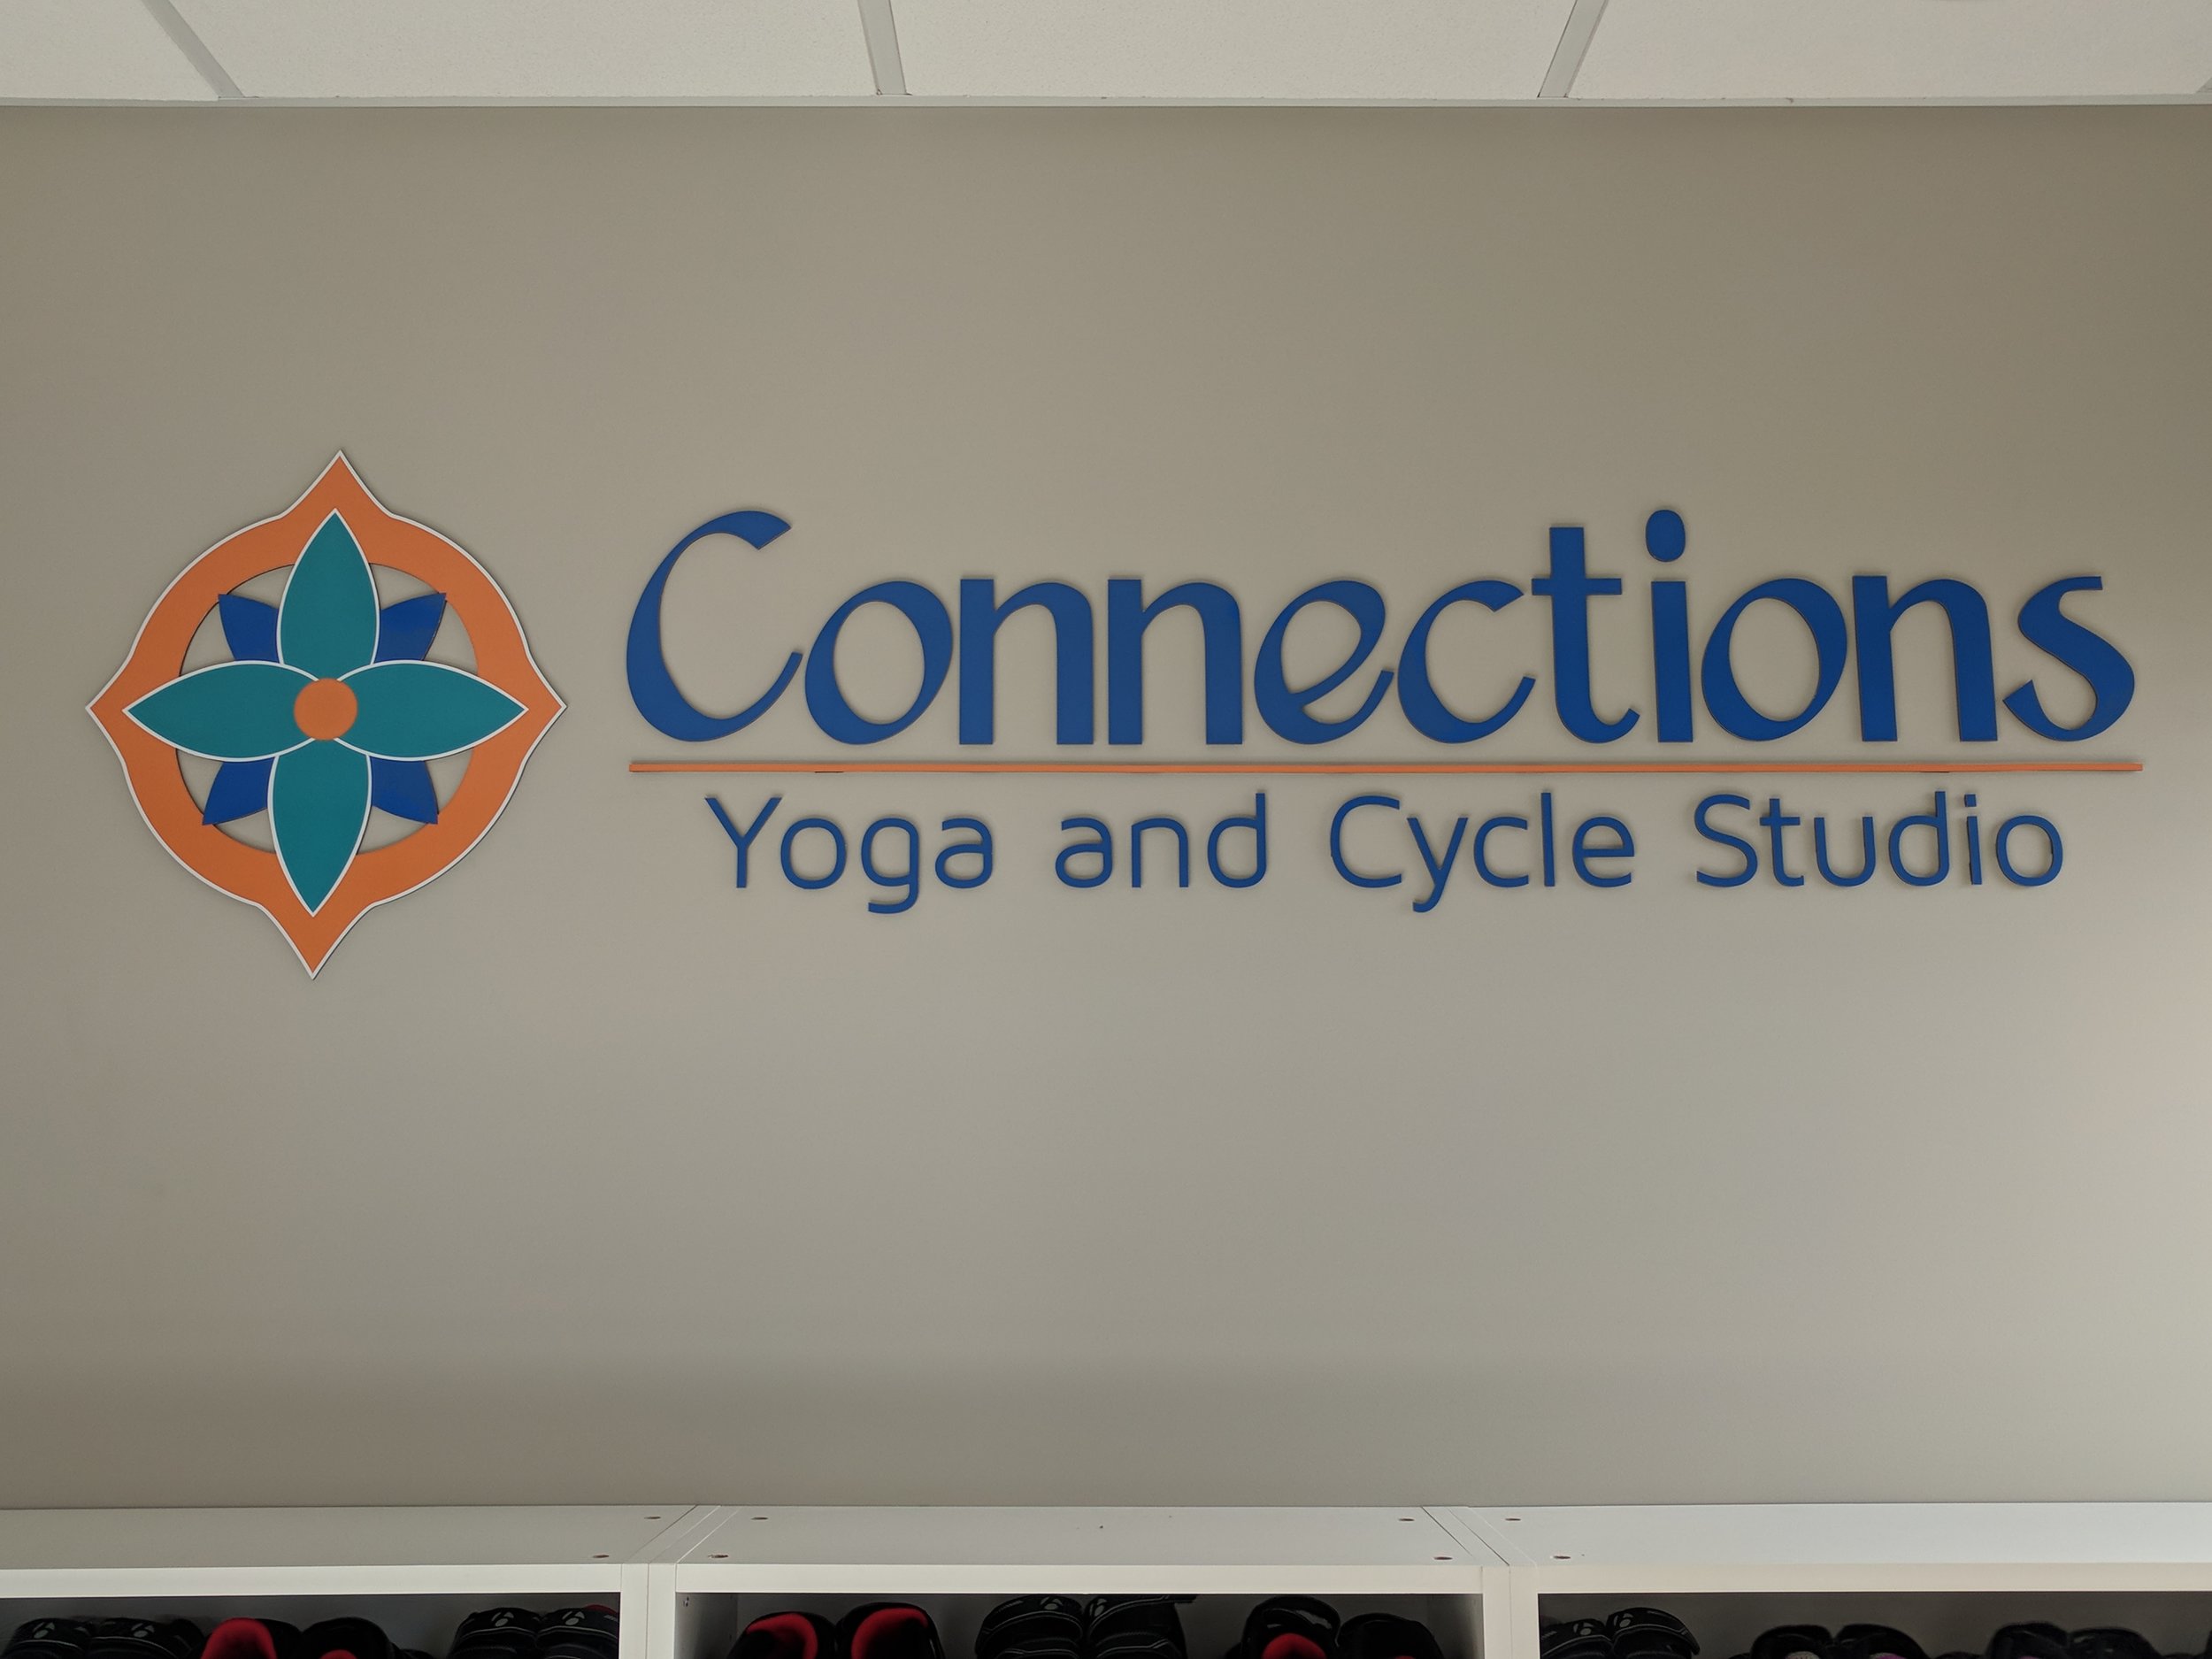       Your Wellness Community    New to Our Studio?  